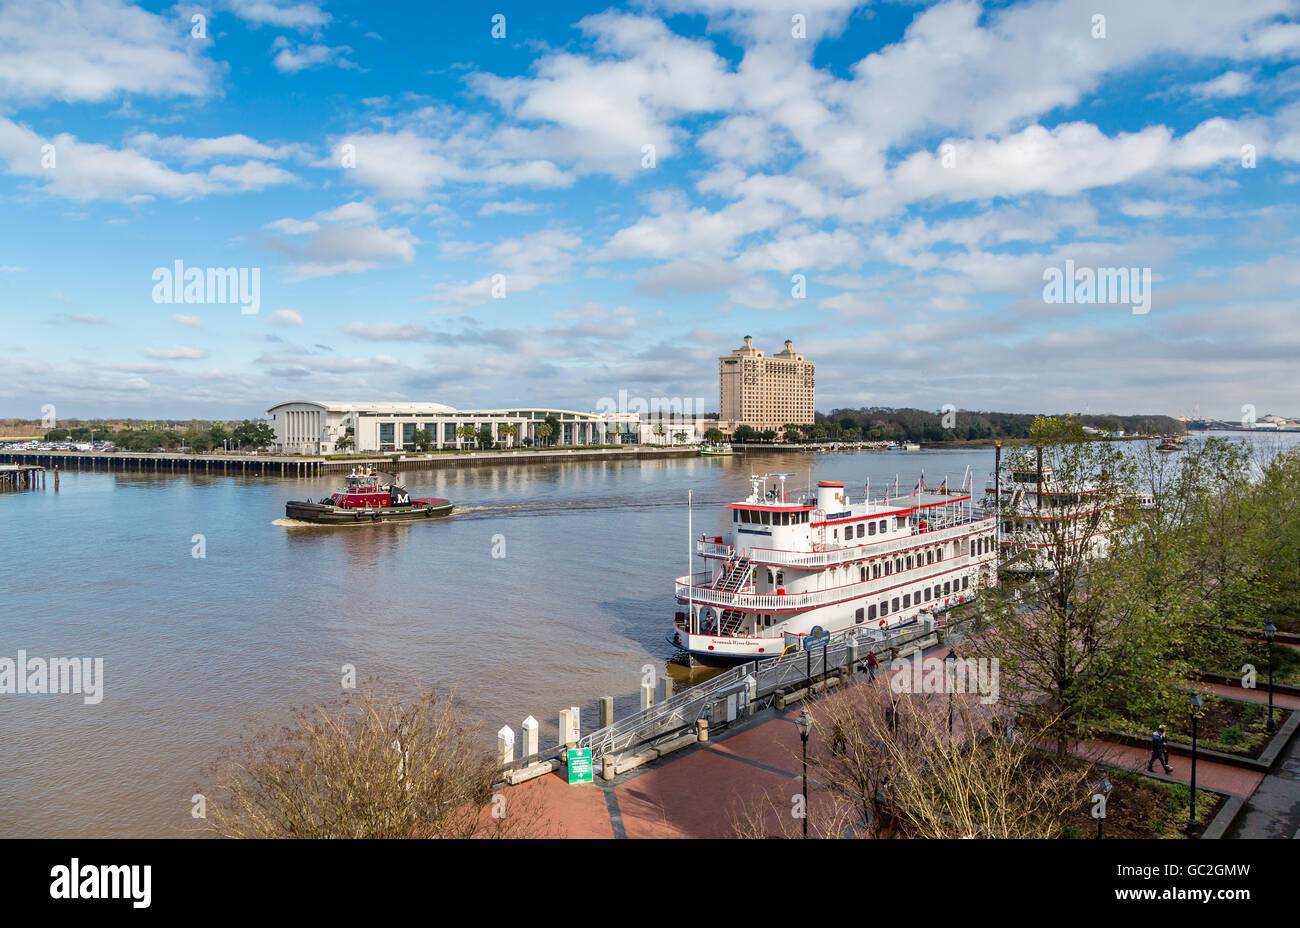 An old fashioned paddle wheel boat on the Savannah River in Georgia Stock Photo